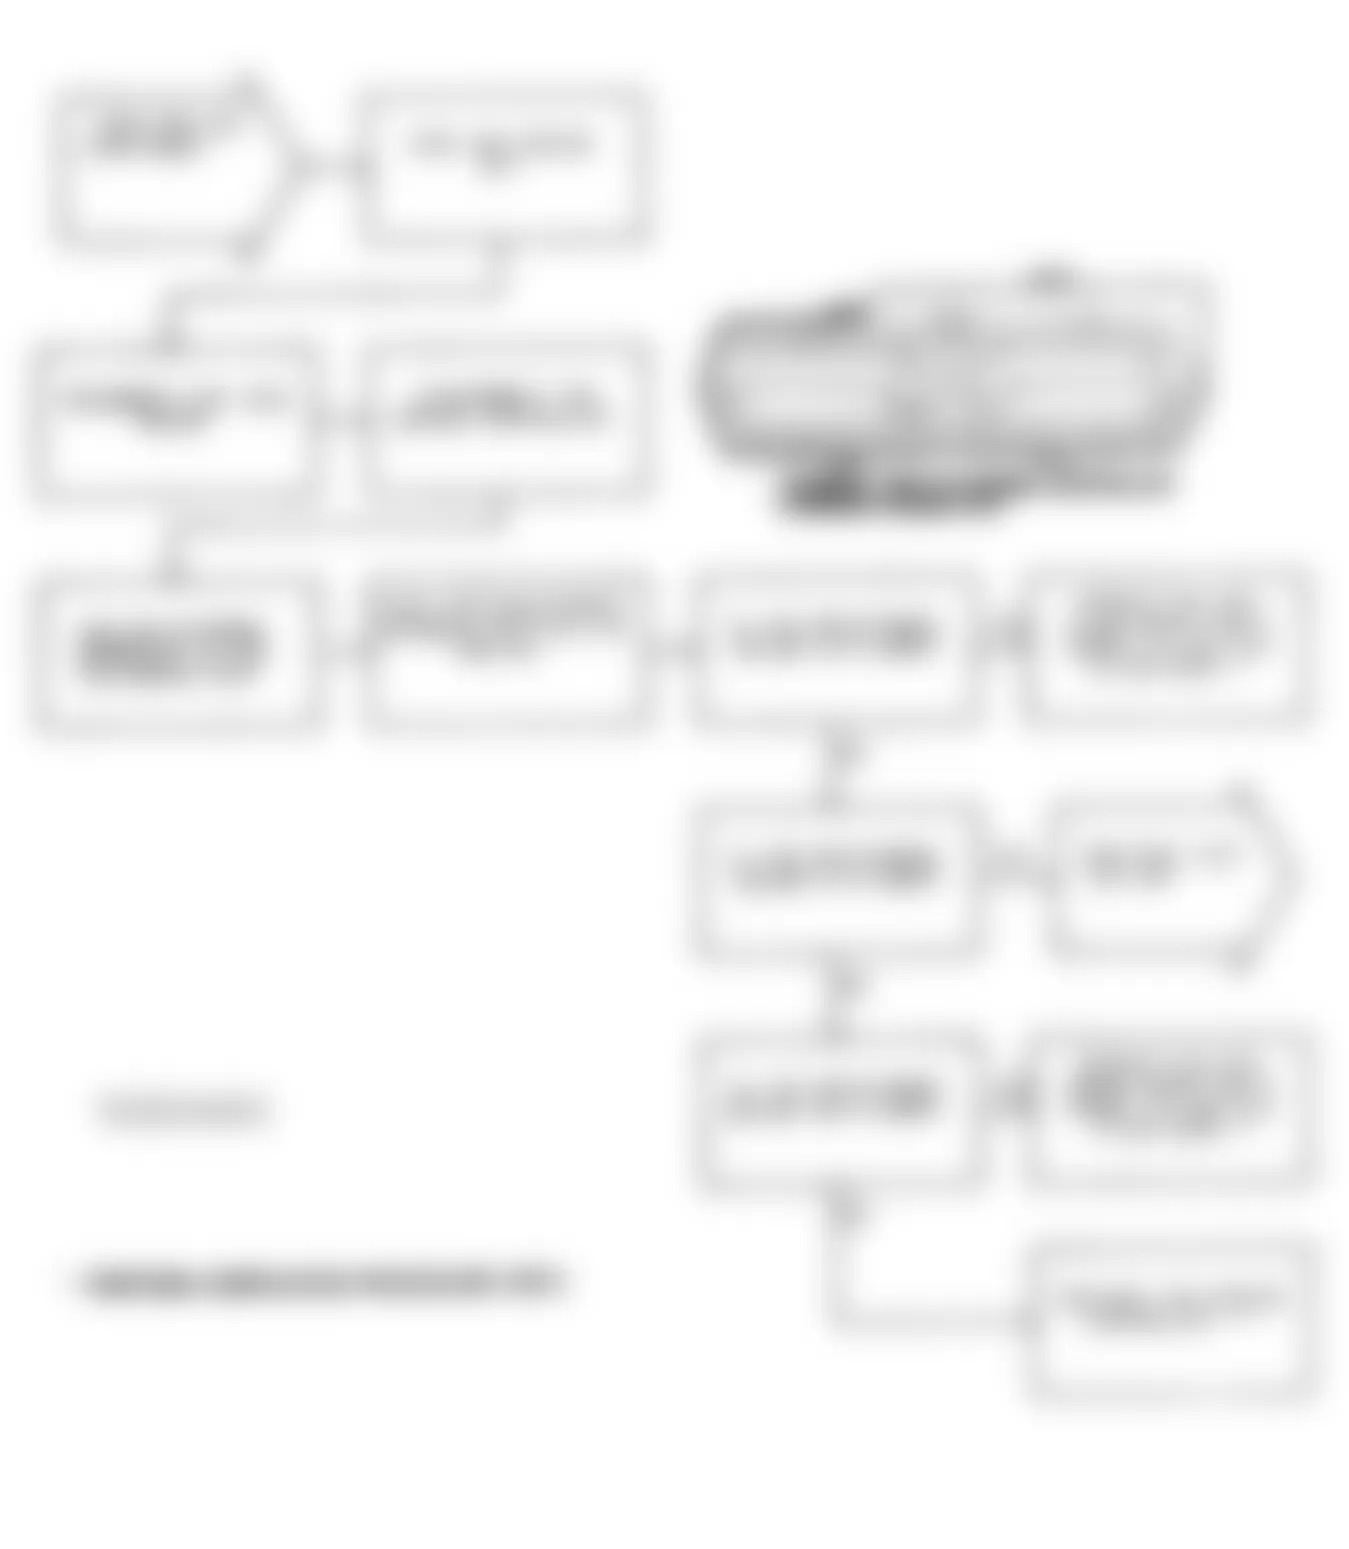 Chrysler Imperial 1991 - Component Locations -  Test DR-14A Code 25: Flowchart (3 of 4)